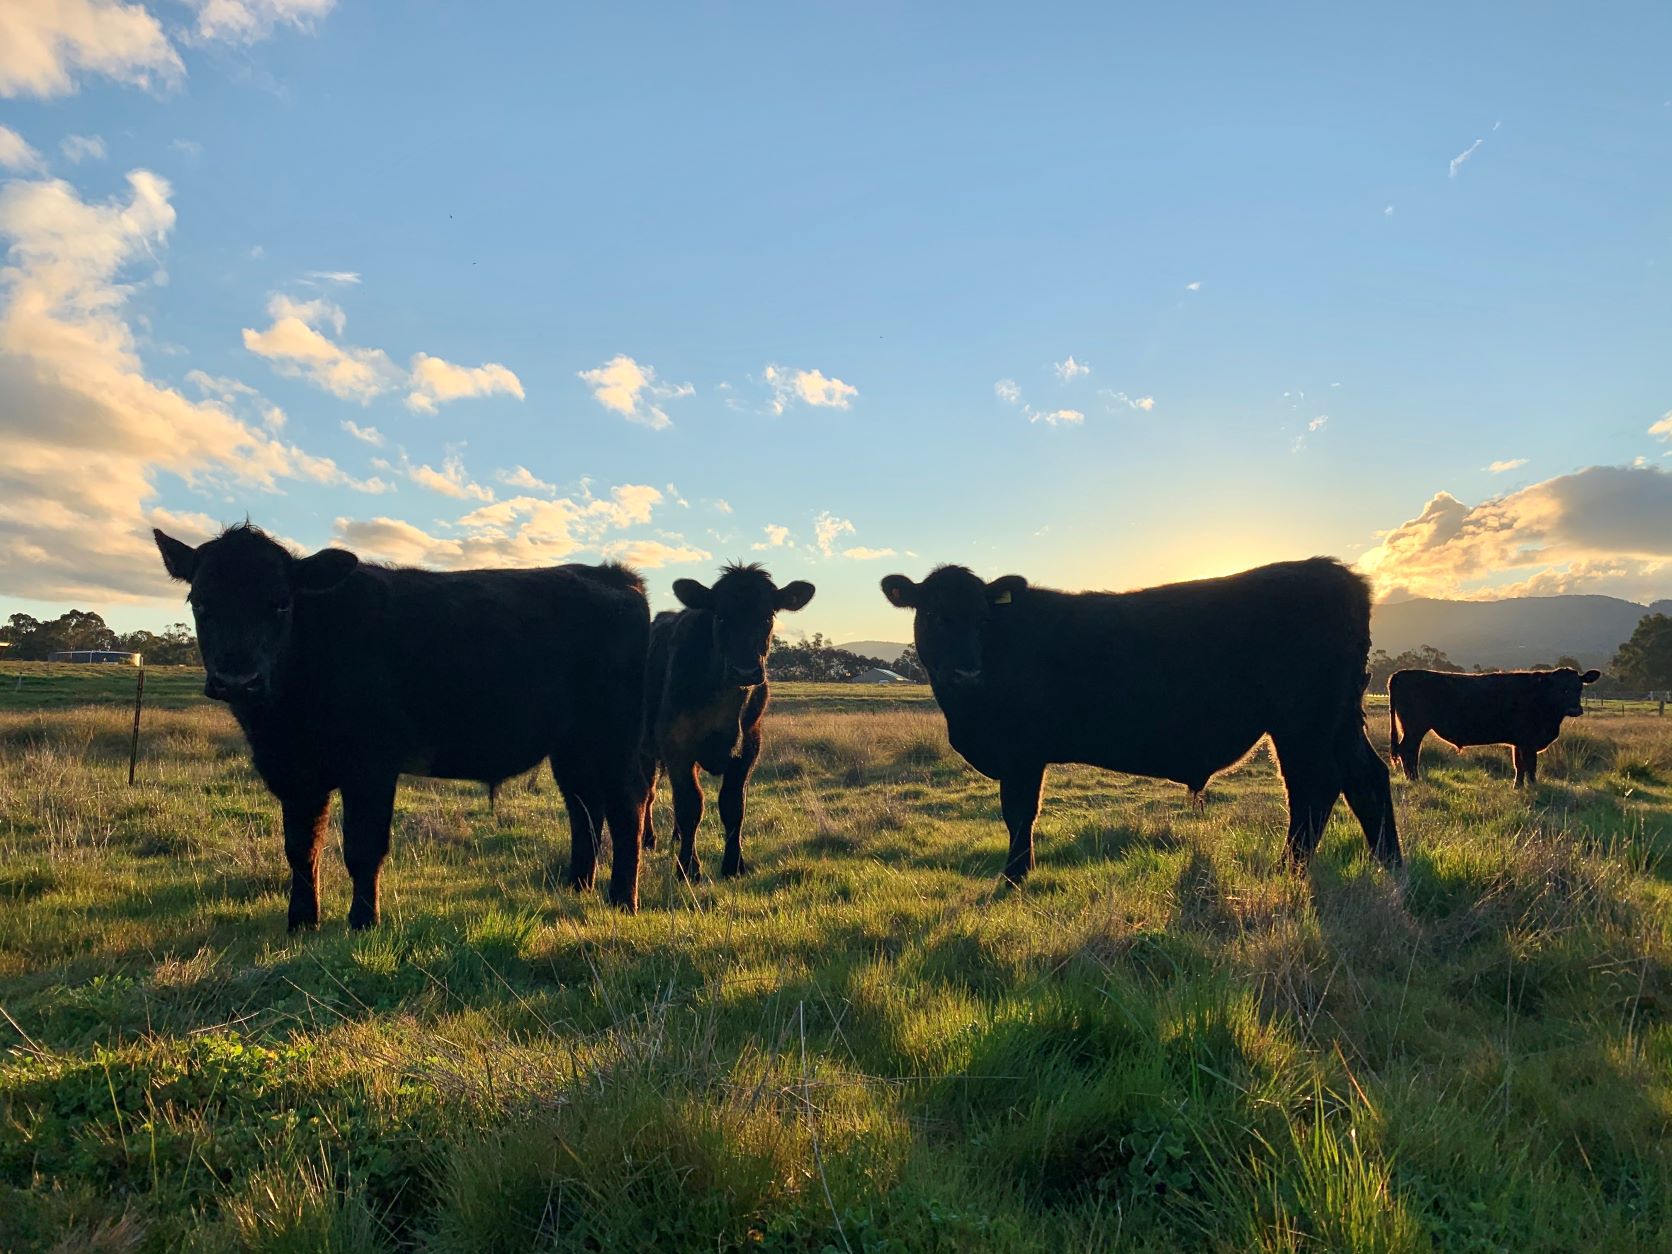 Four black cattle on green grass, backlit by sun